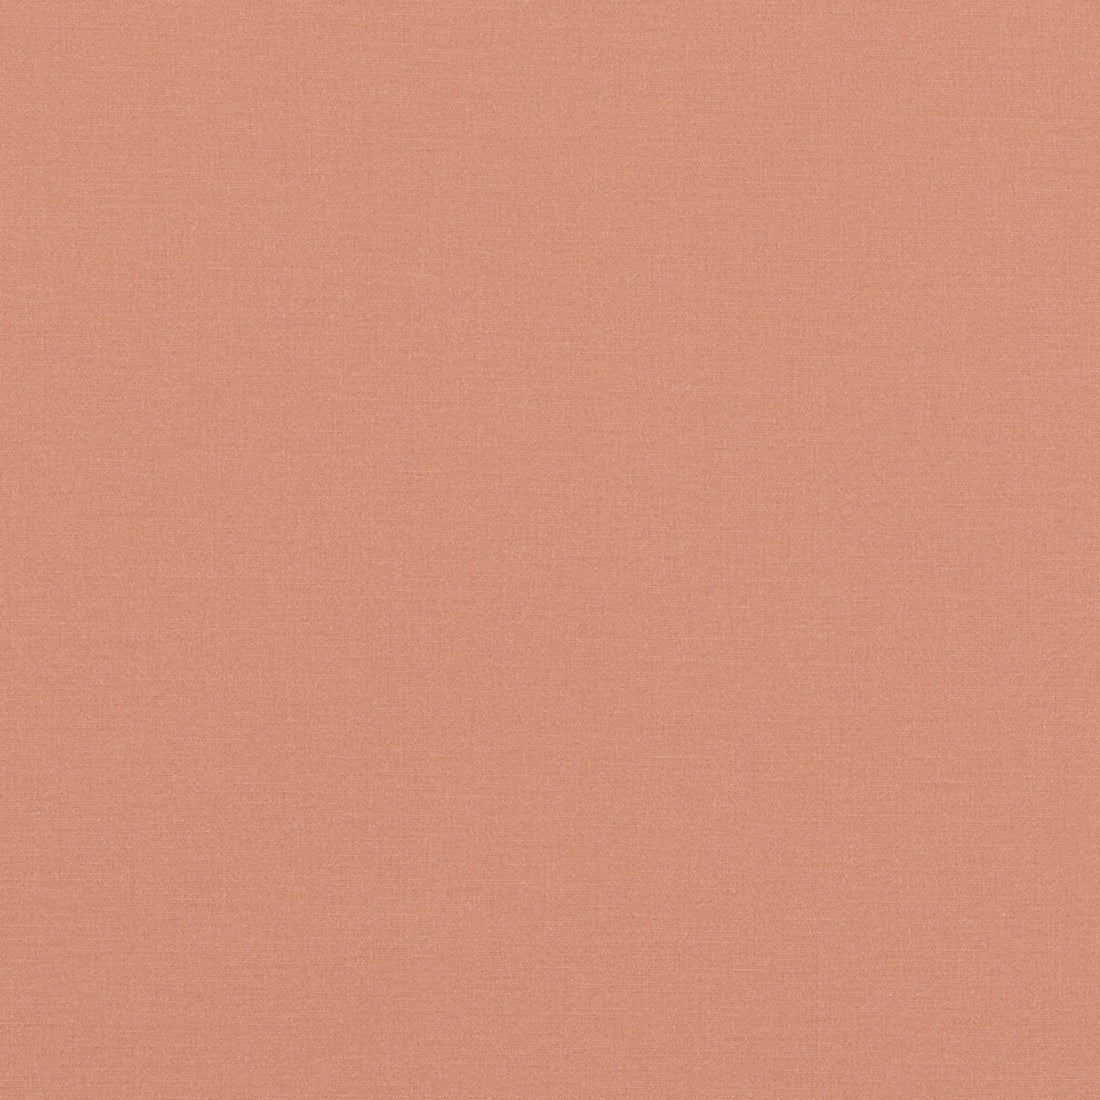 Pavilion fabric in salmon color - pattern PF50478.322.0 - by Baker Lifestyle in the Pavilion - Blegrave Notebook collection